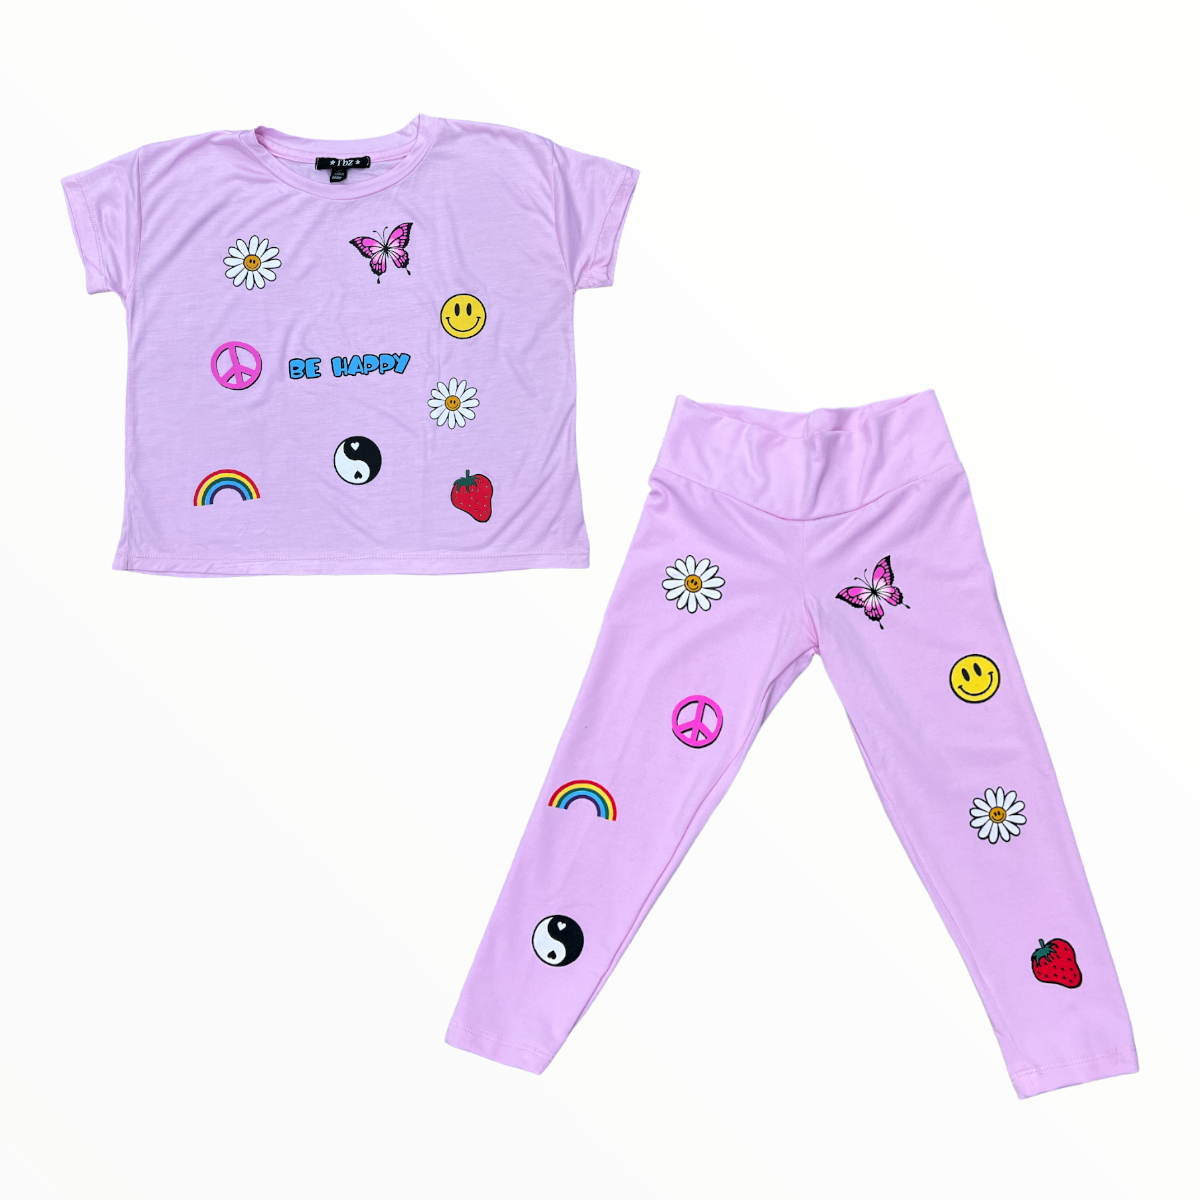 FLOWERS BY ZOE LEGGING - BABY PINK/ICON